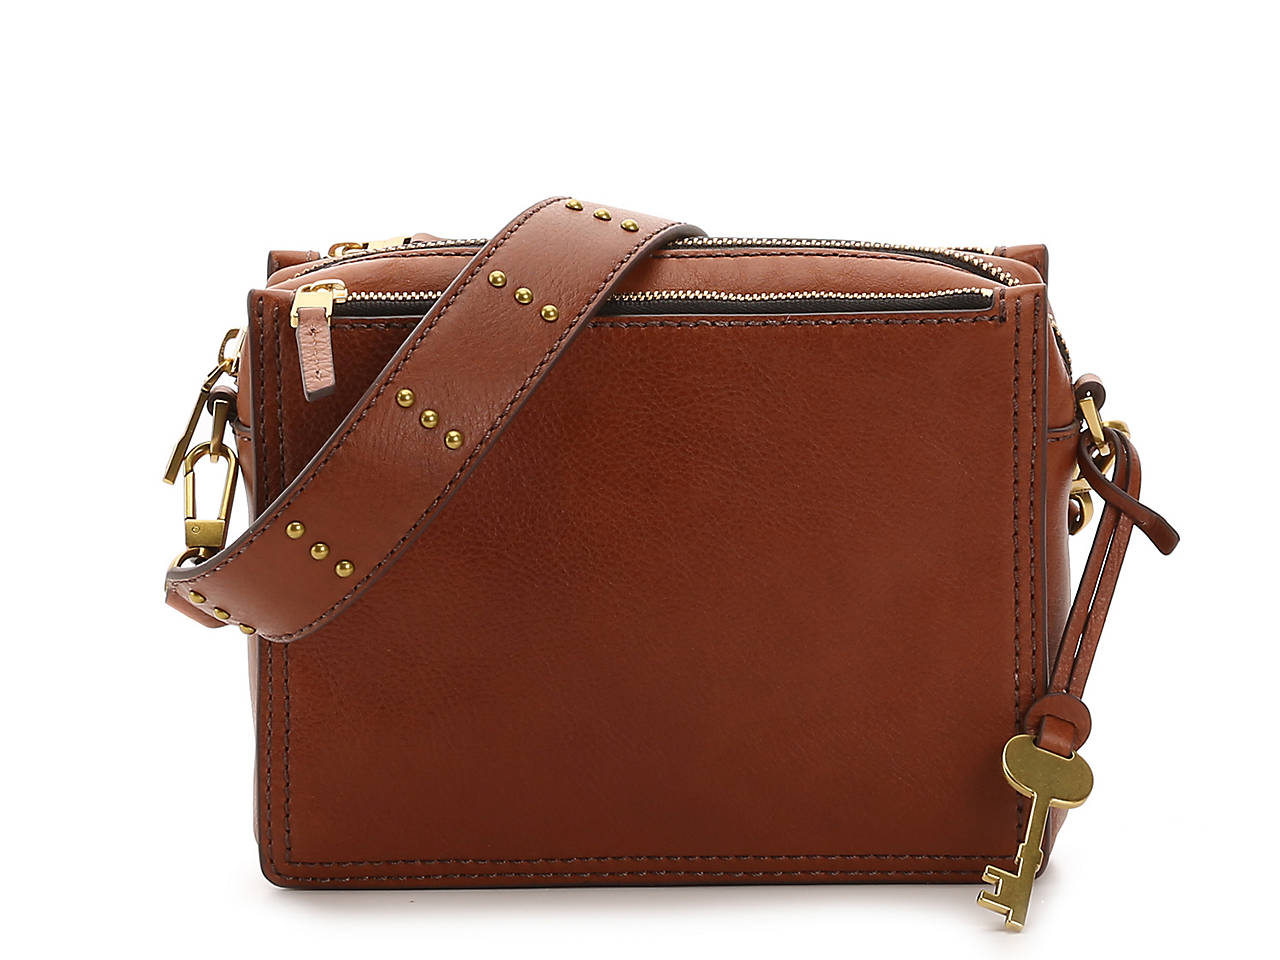 Fossil Campbell Leather Crossbody Bag Women's Handbags & Accessories | DSW